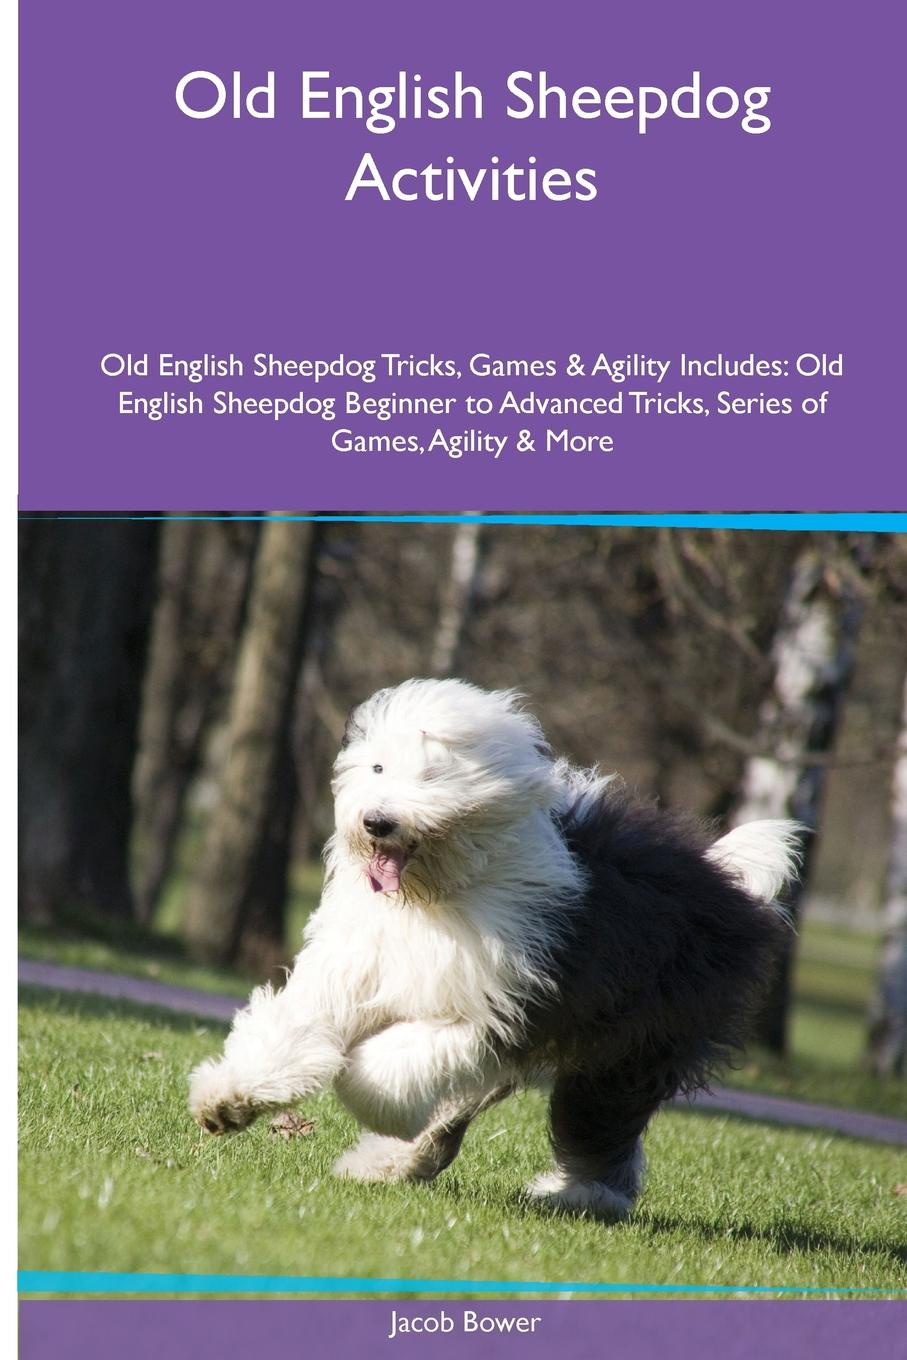 Old English Sheepdog  Activities Old English Sheepdog Tricks, Games & Agility. Includes. Old English Sheepdog Beginner to Advanced Tricks, Series of Games, Agility and More